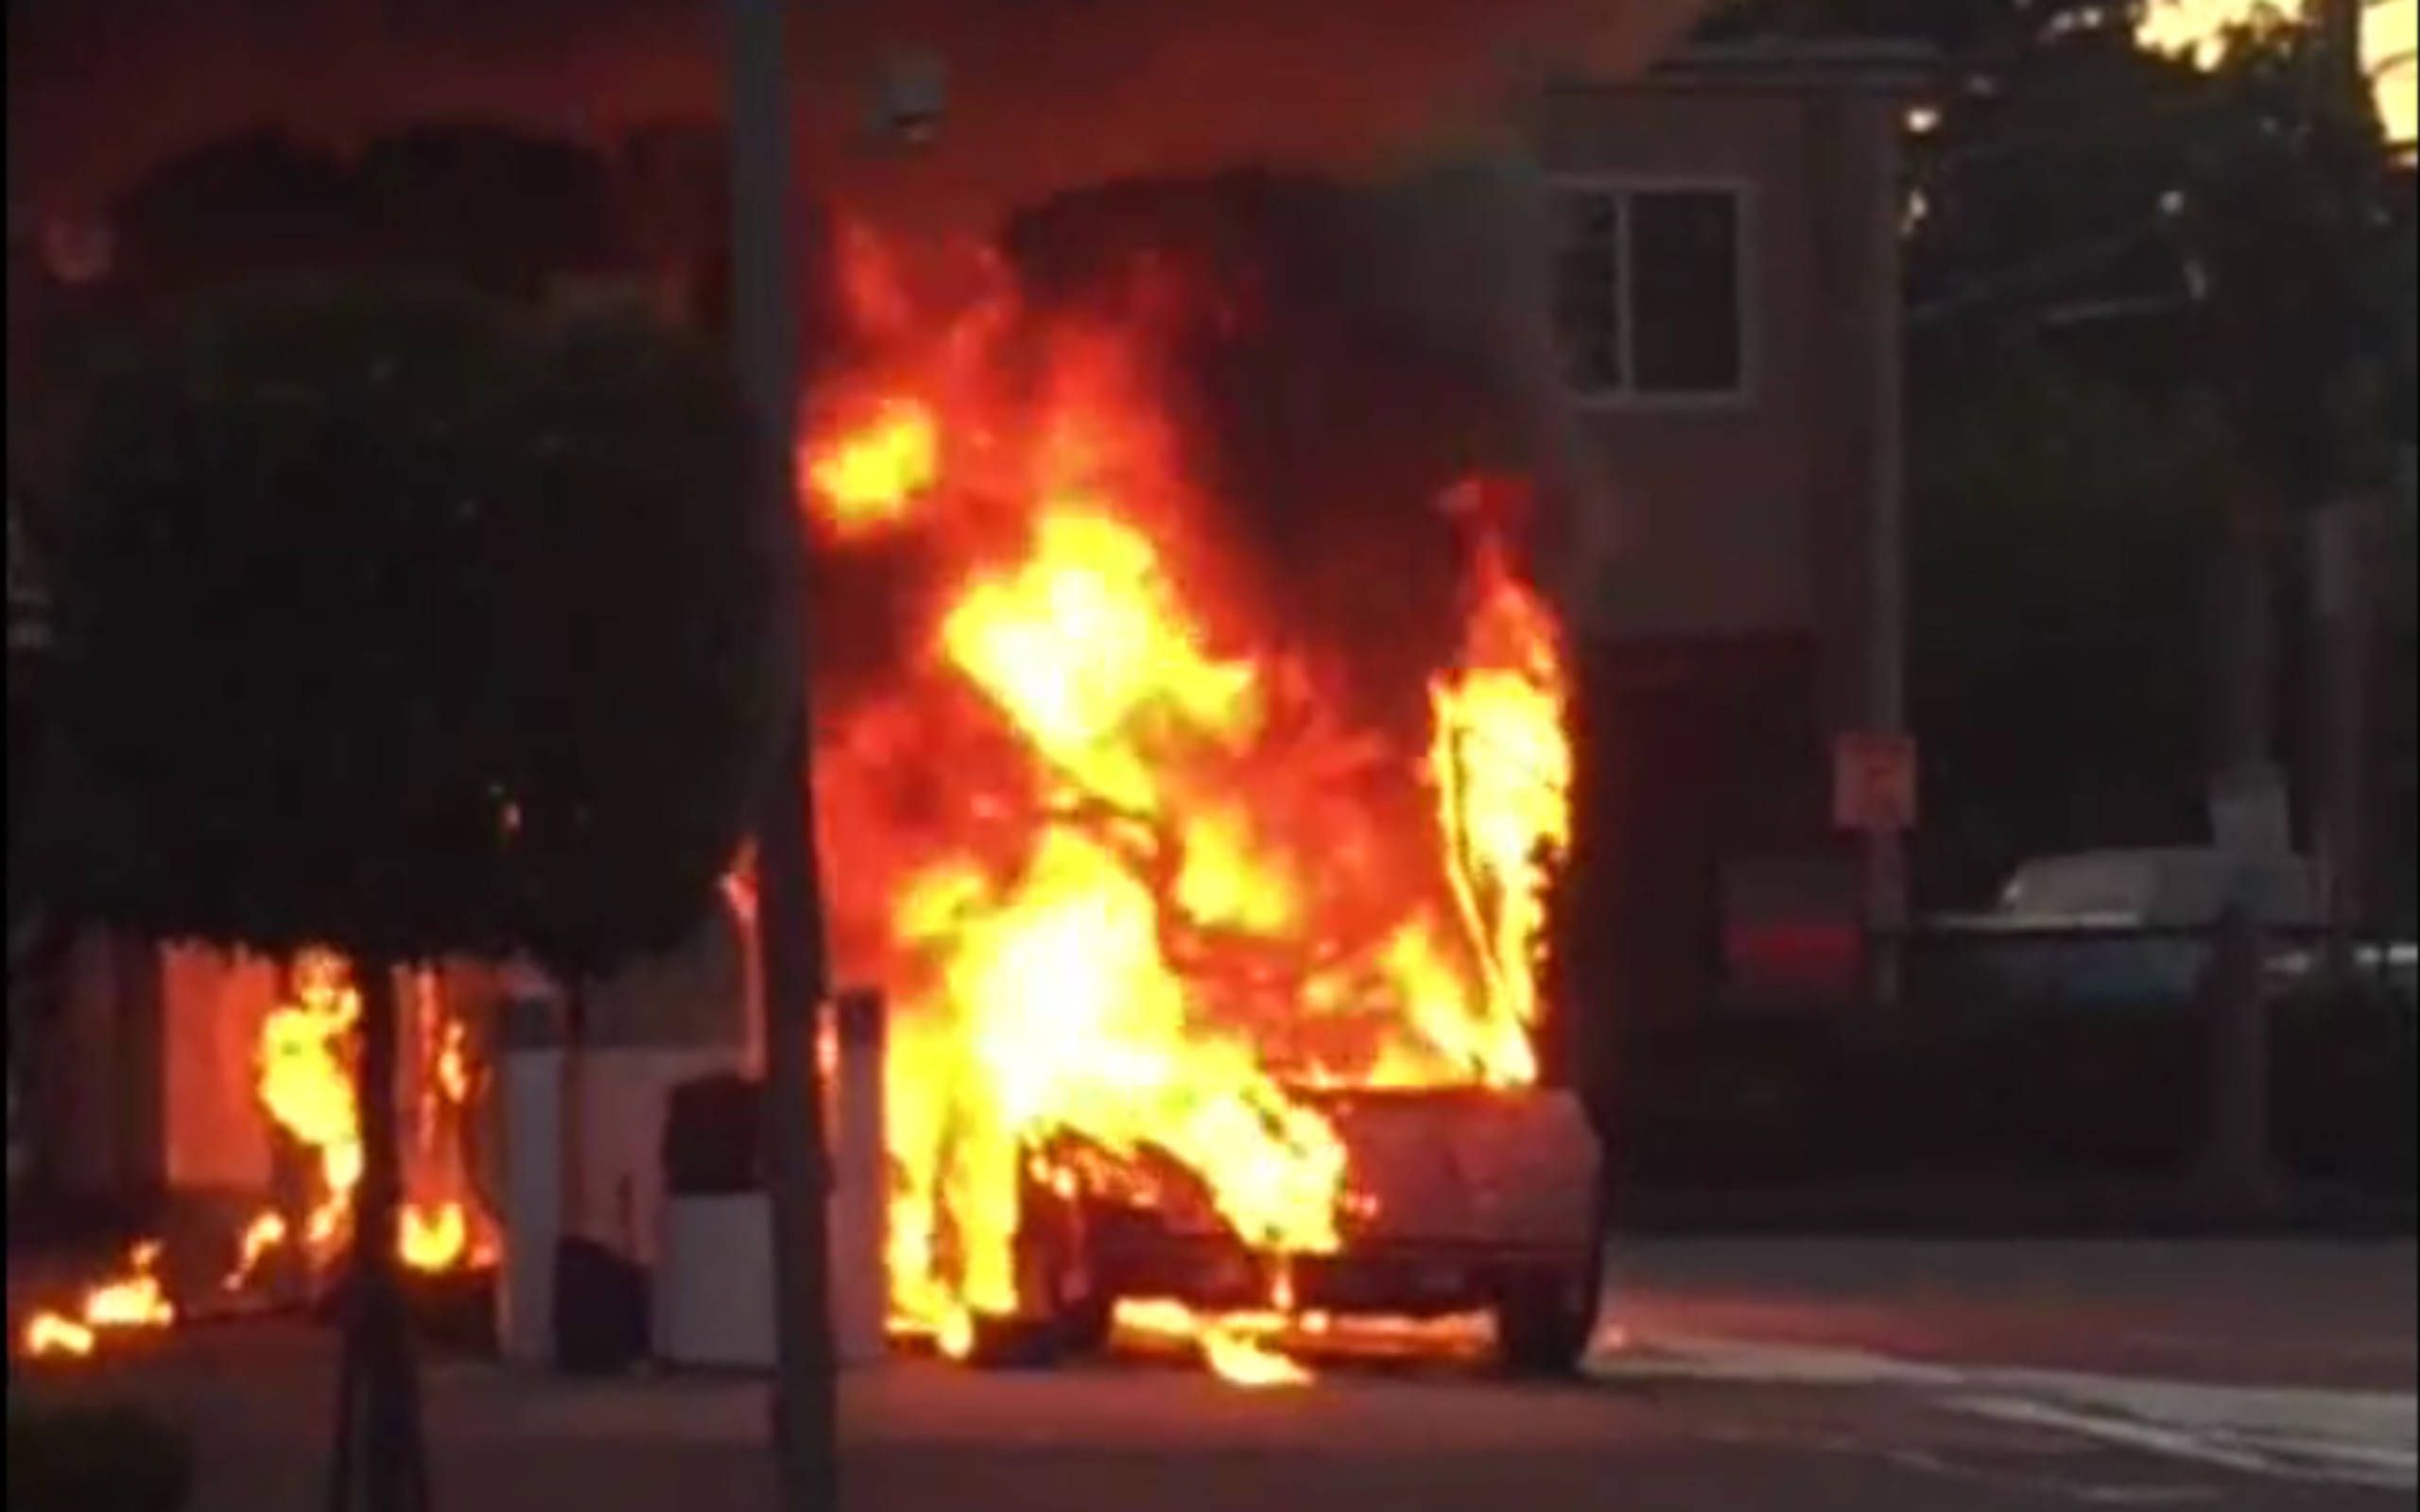 Fire takes out a Lamborghini Countach -- but it could have been worse